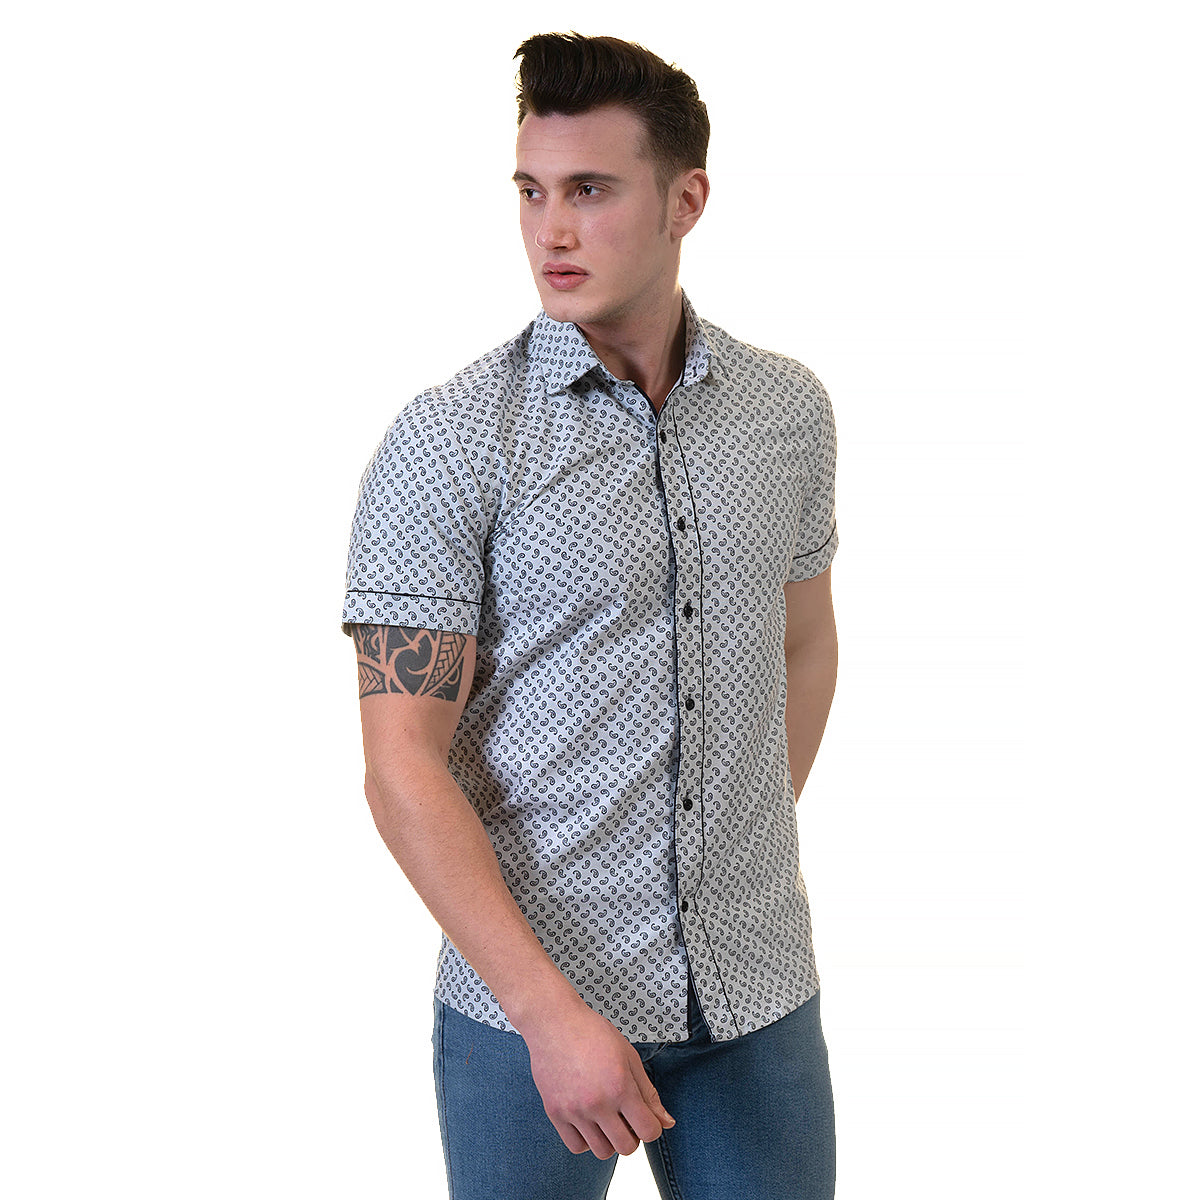 Grey Mens Short Sleeve Button up Shirts - Tailored Slim Fit Cotton Dress Shirts